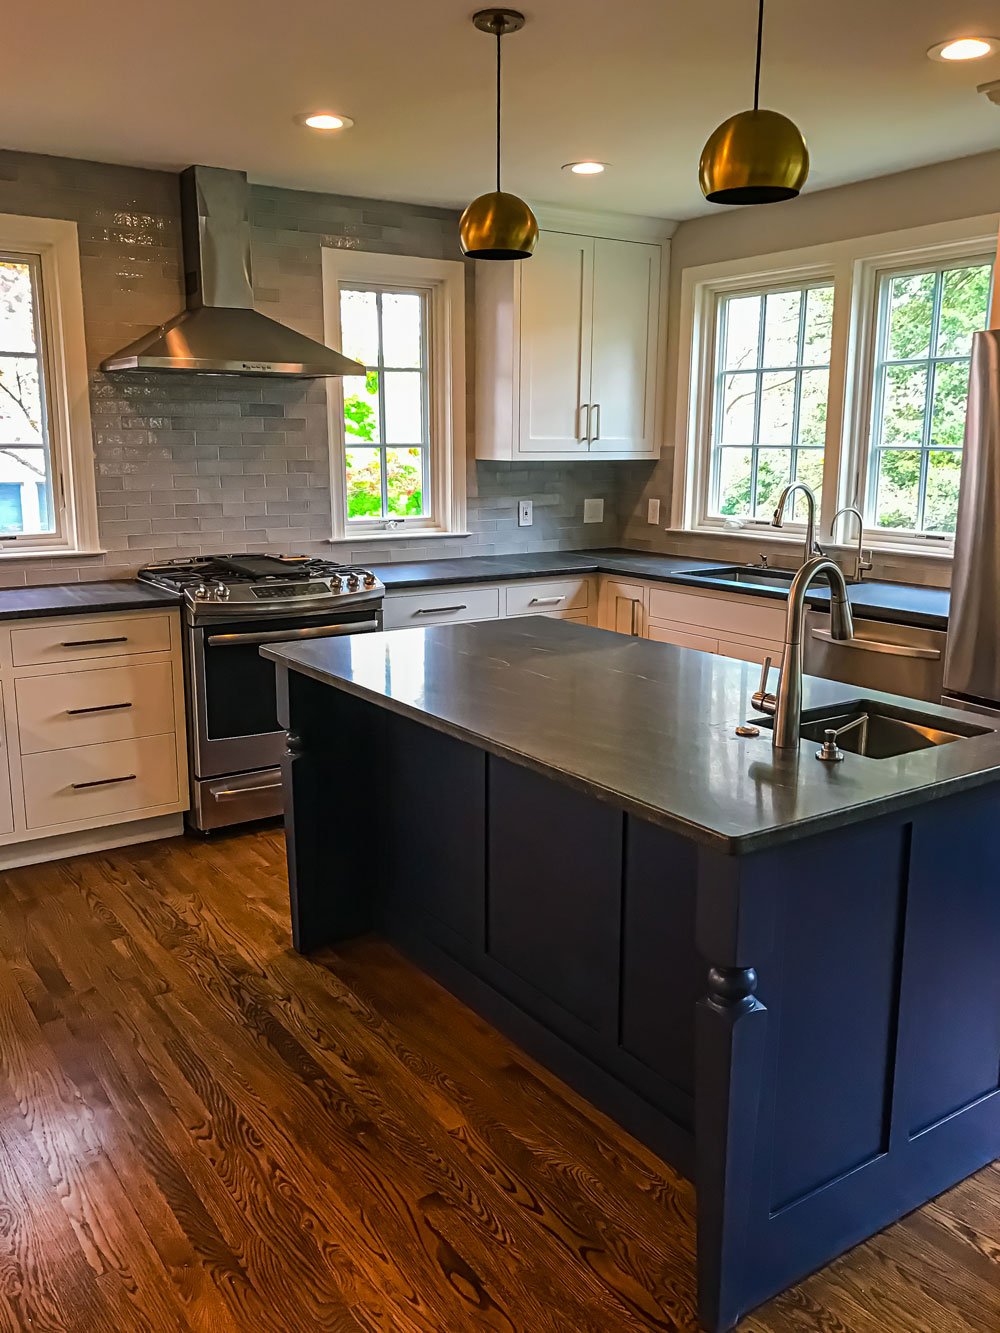 navy wooden kitchen countertop with white cabinets and ceramic backsplash